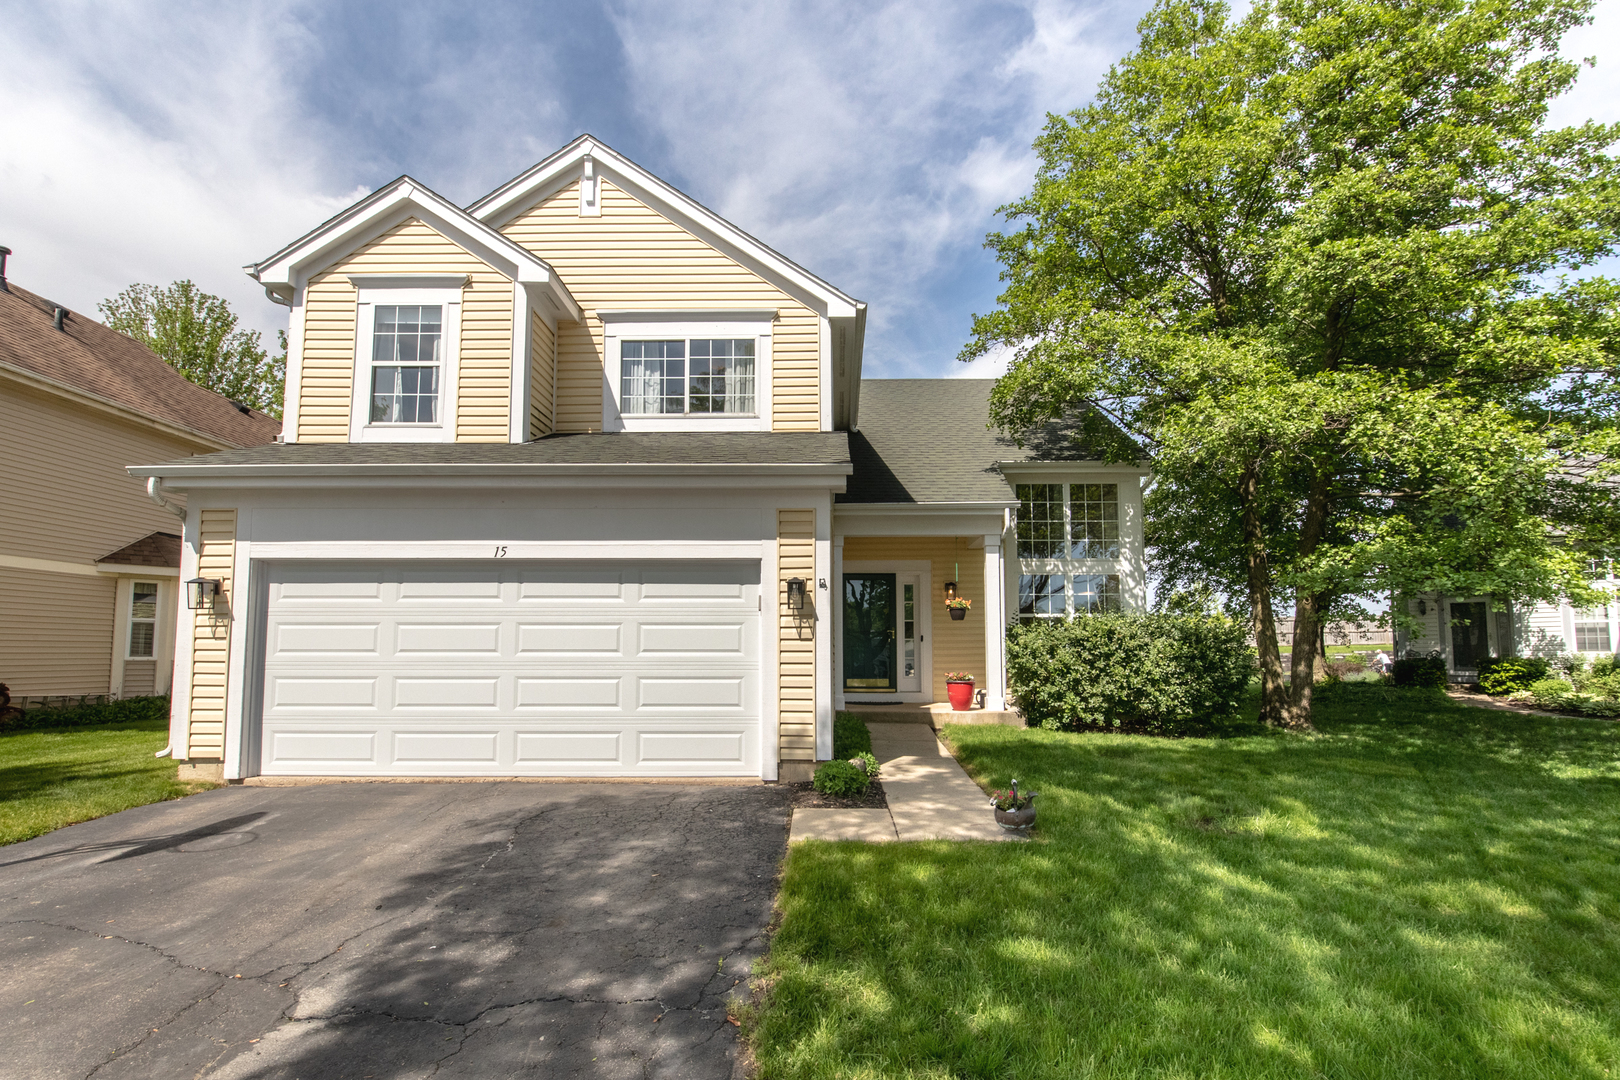 15 Coventry Court, South Elgin, Il 60177